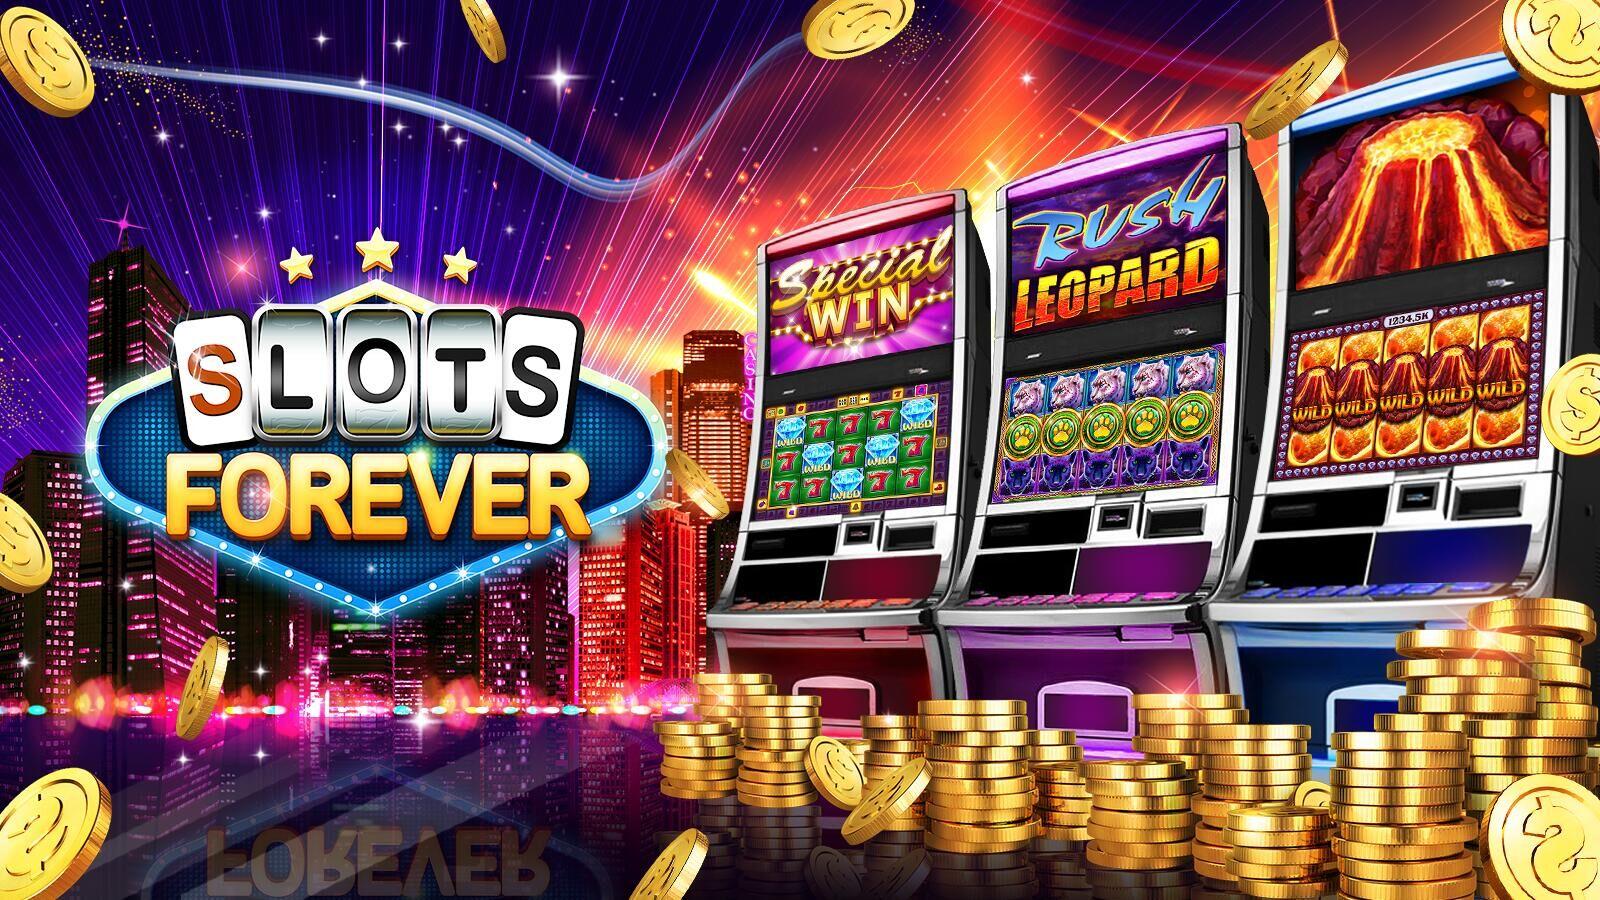 How to Play Online Slots ⋆ boylstonchessclub.org